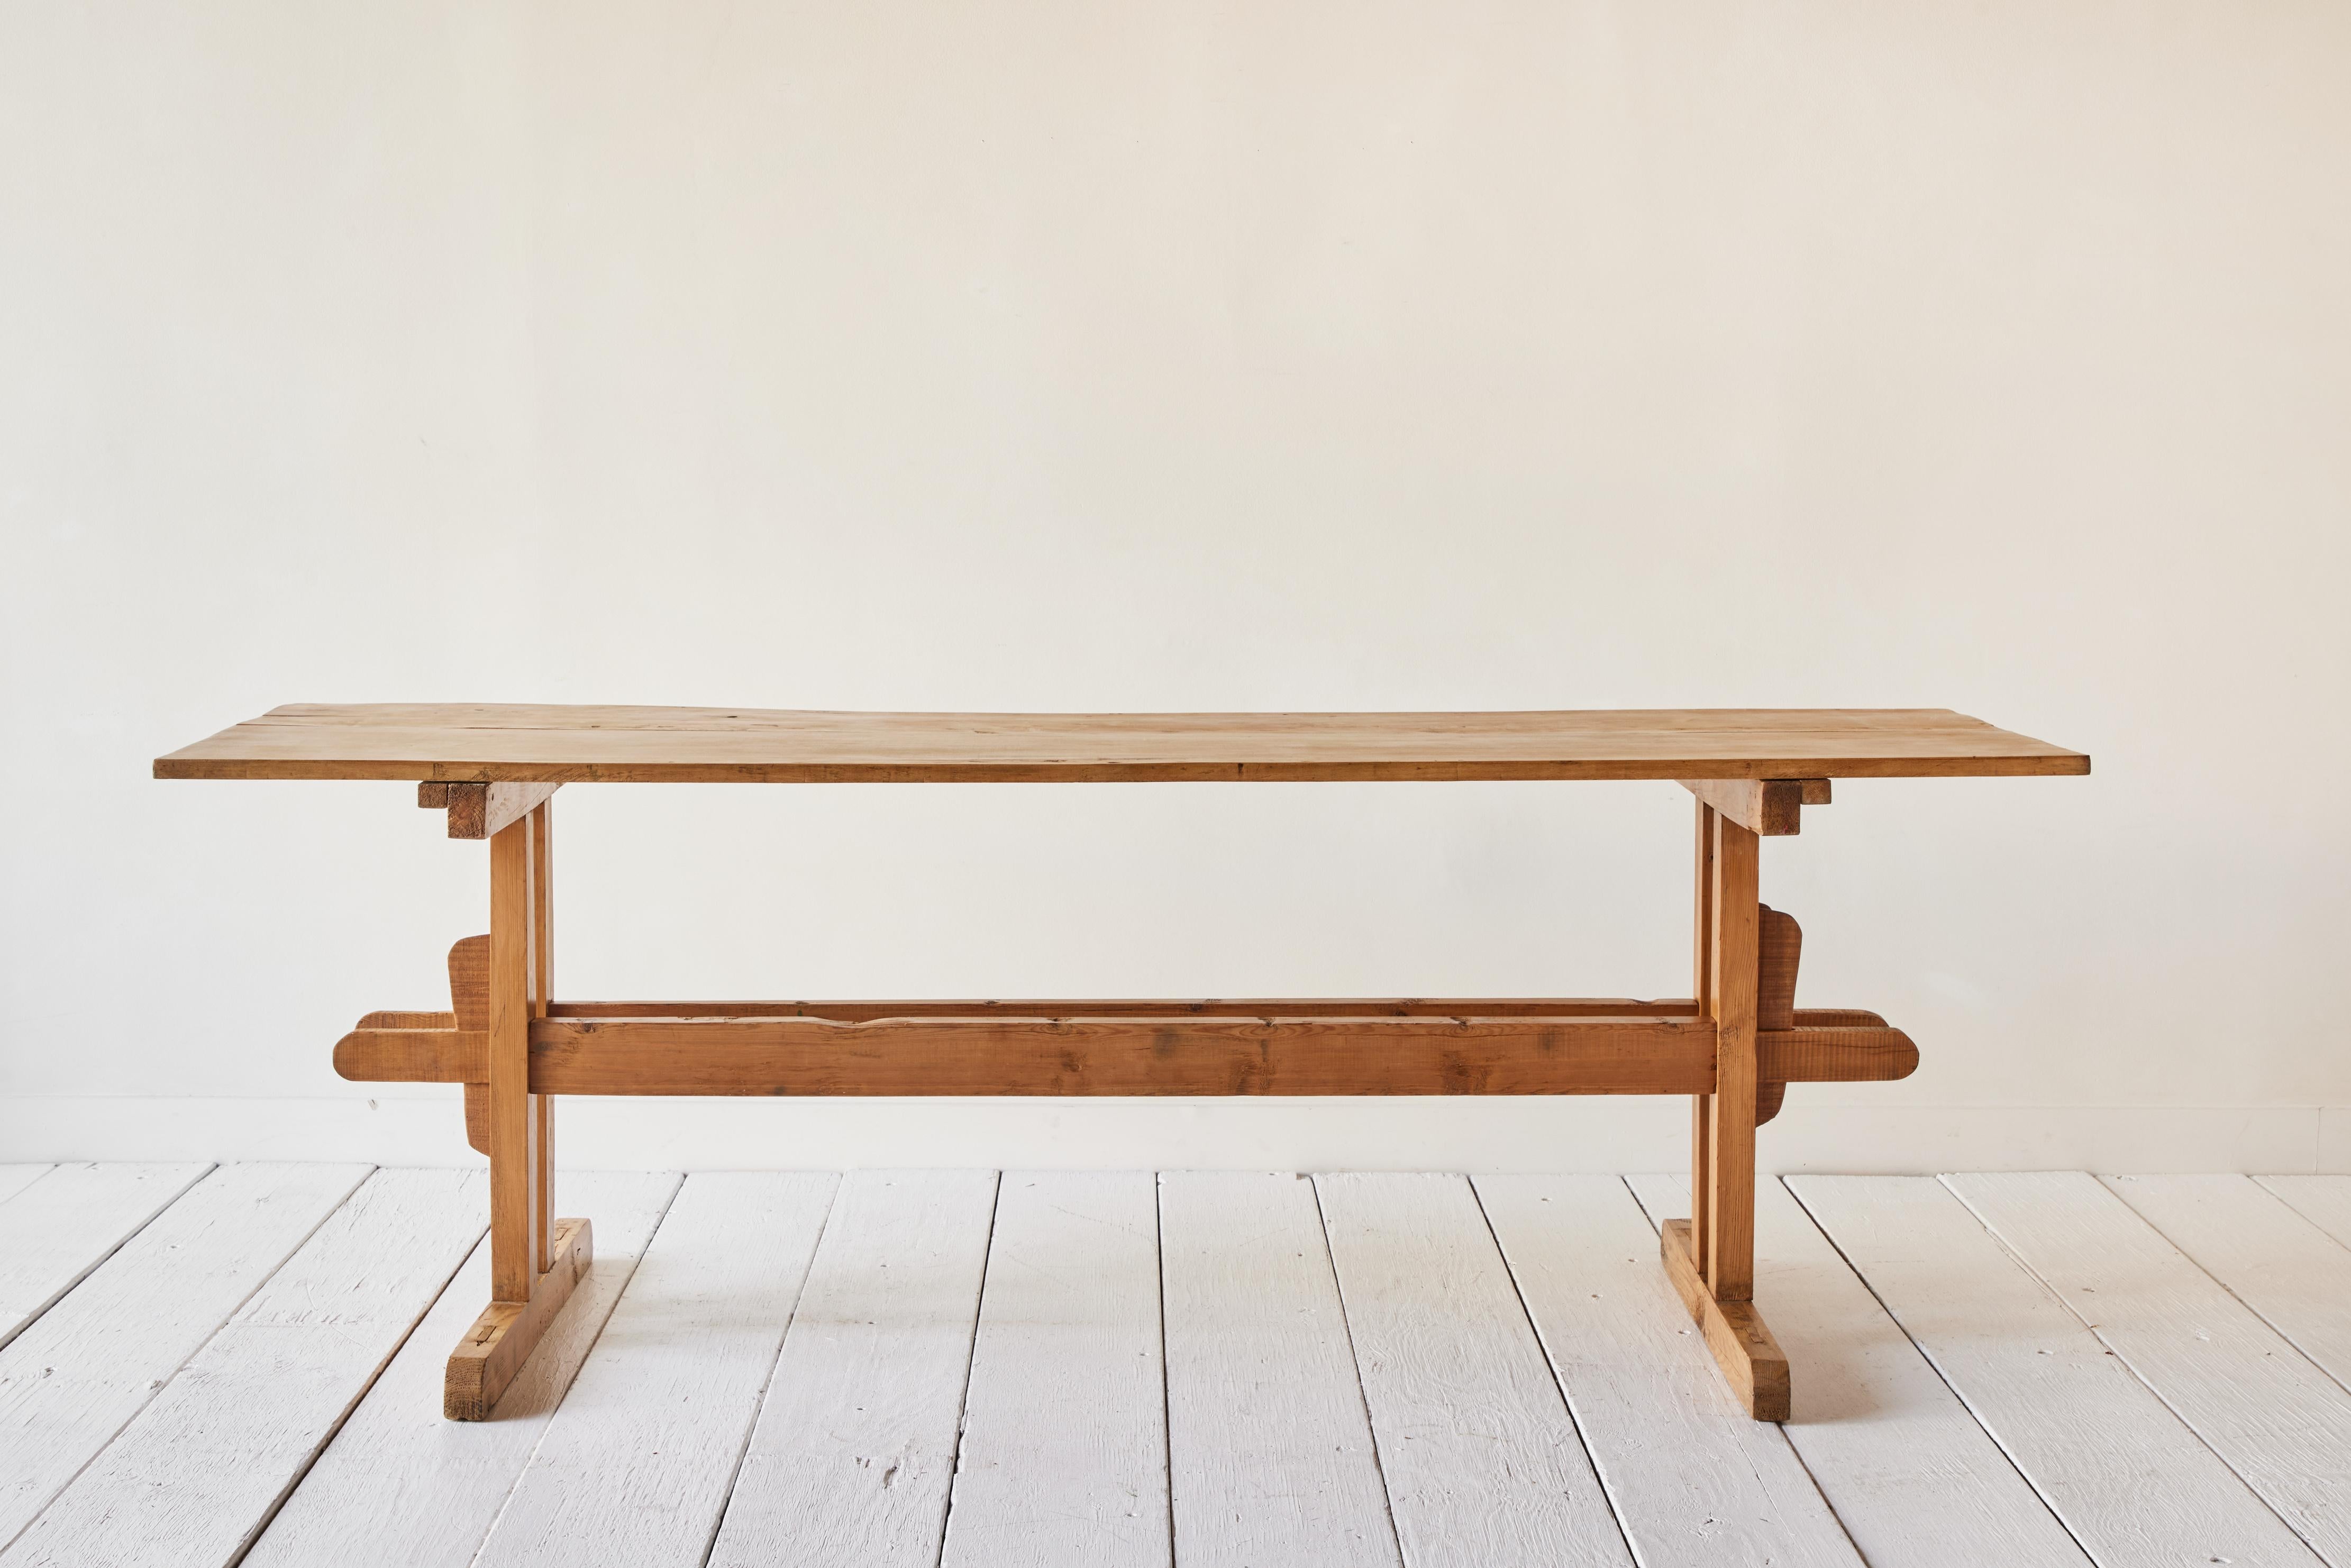 Antique 18th Century trestle farm table from Hungary. A centralized base allows ample seating around a table. Made of solid pine.